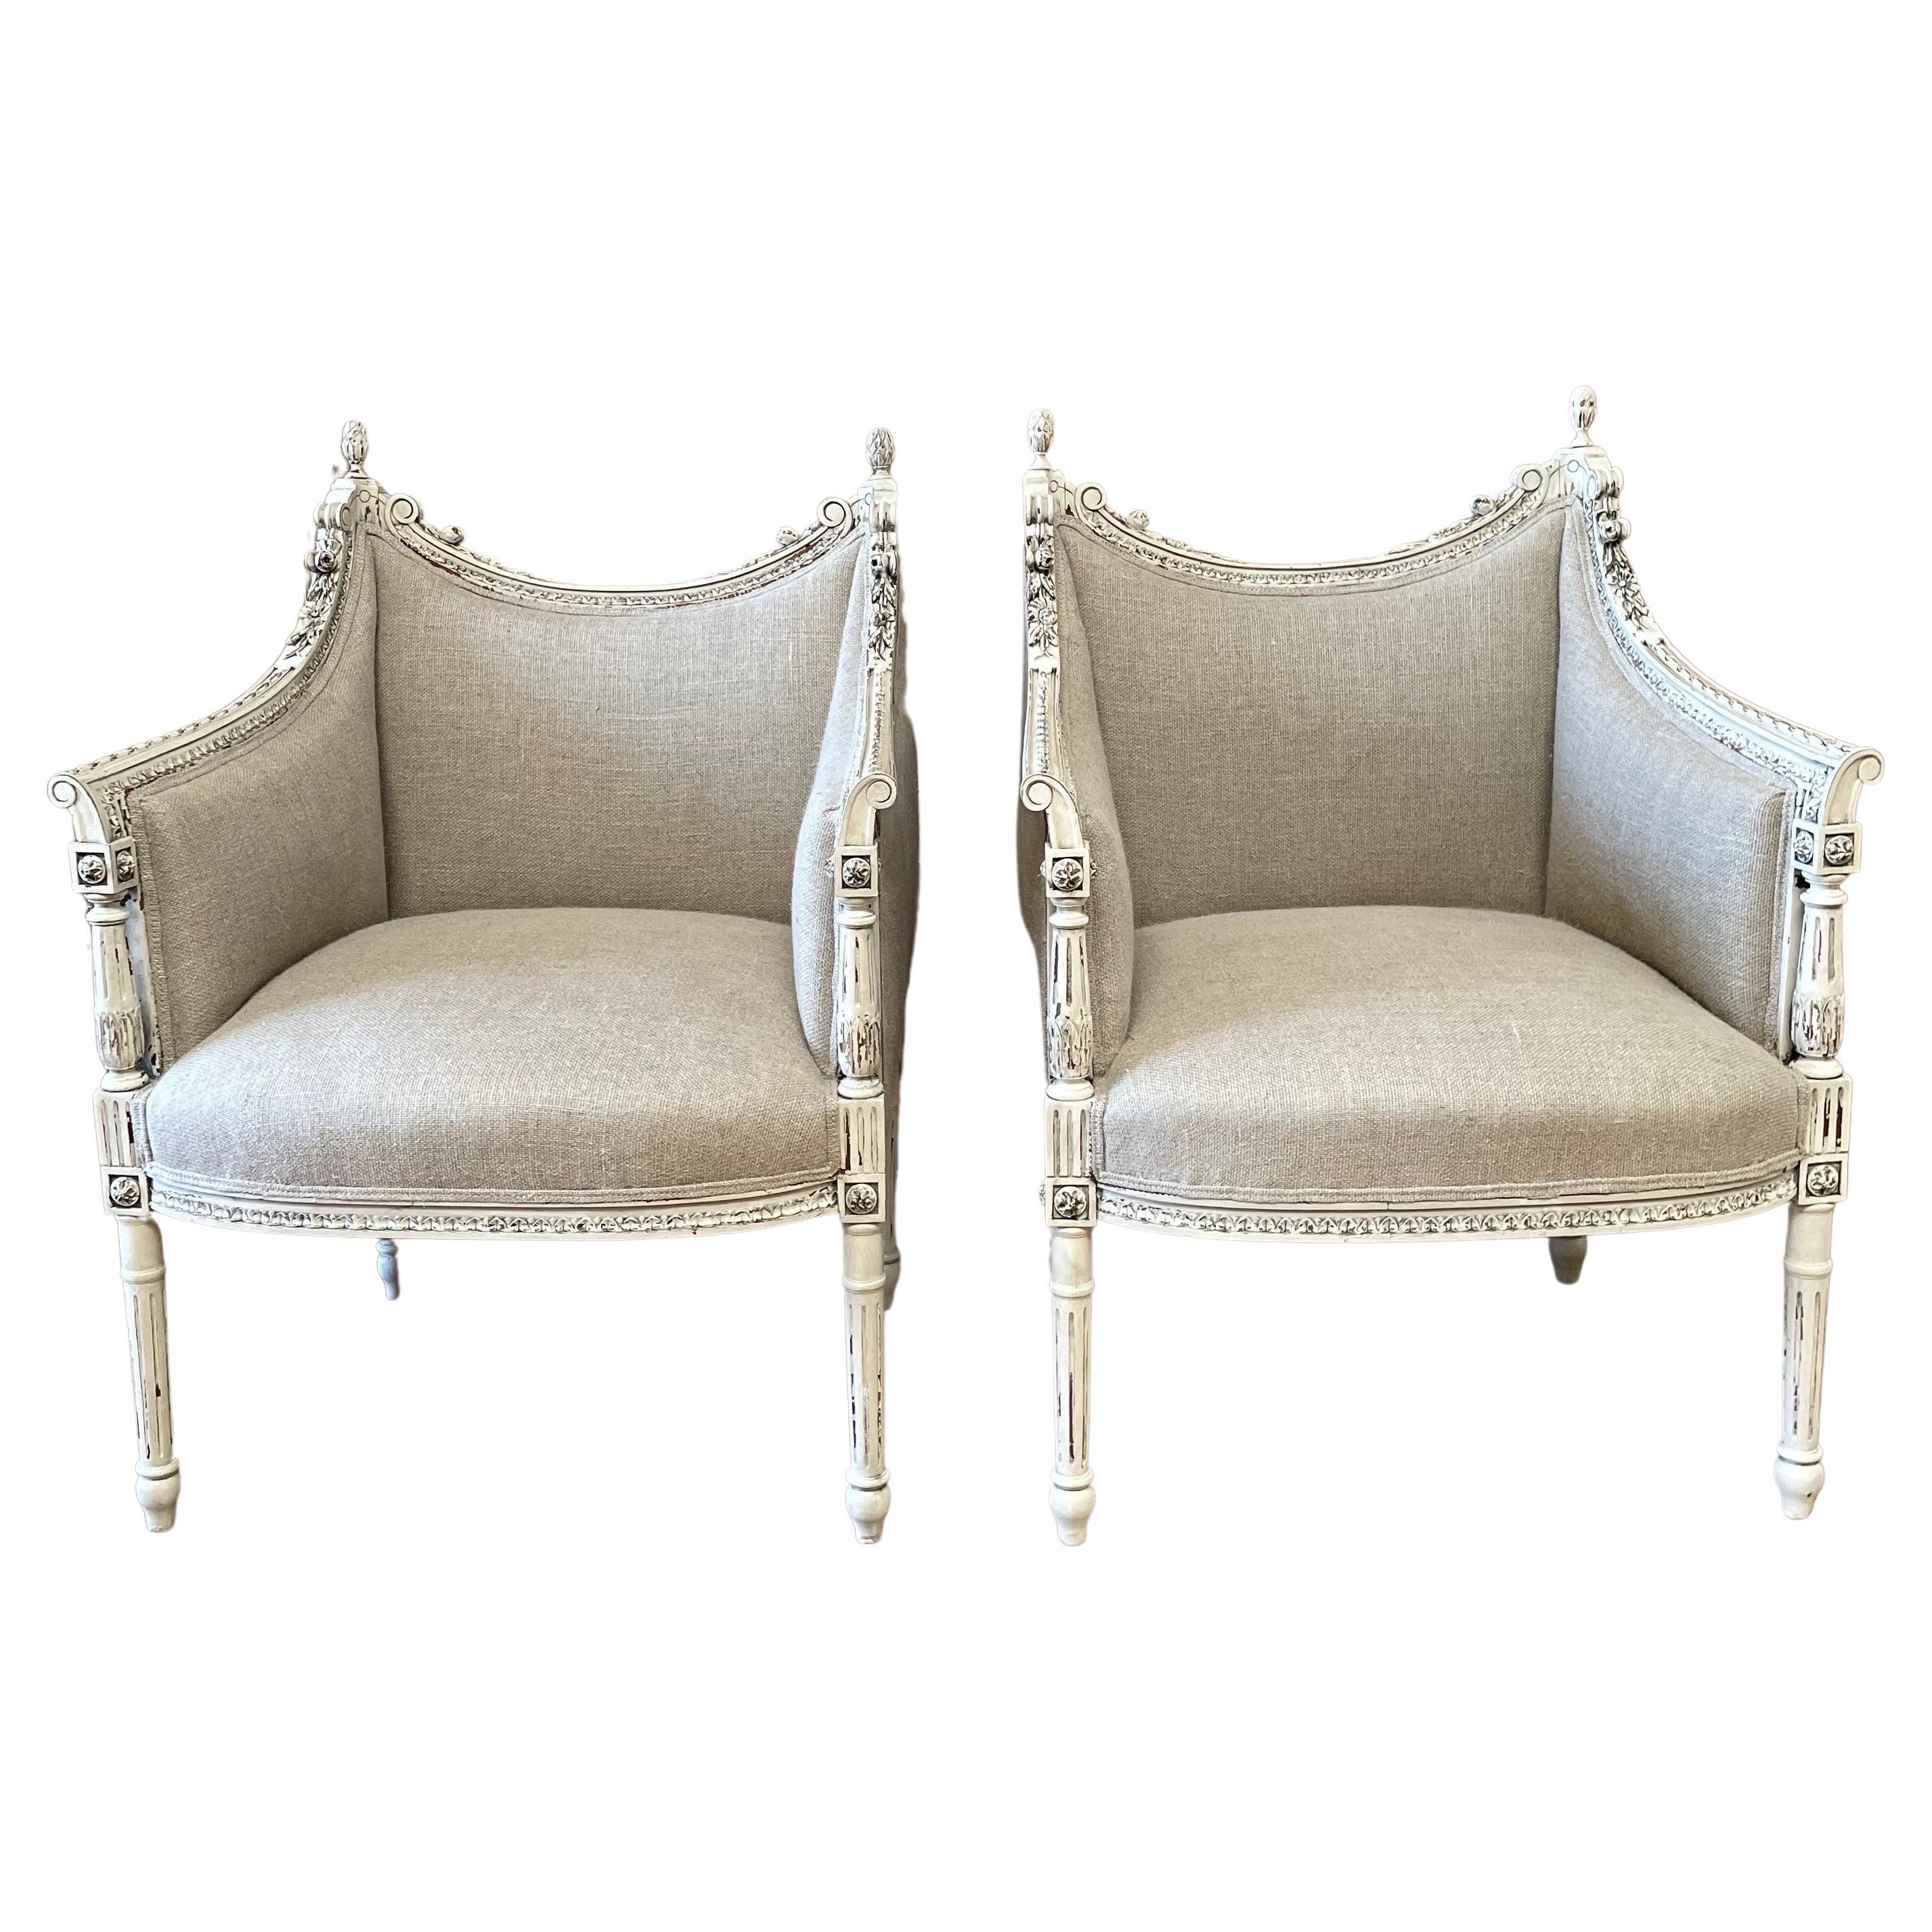 Pair of Antique Louis XVI Style Chairs Upholstered in Irish Natural Linen